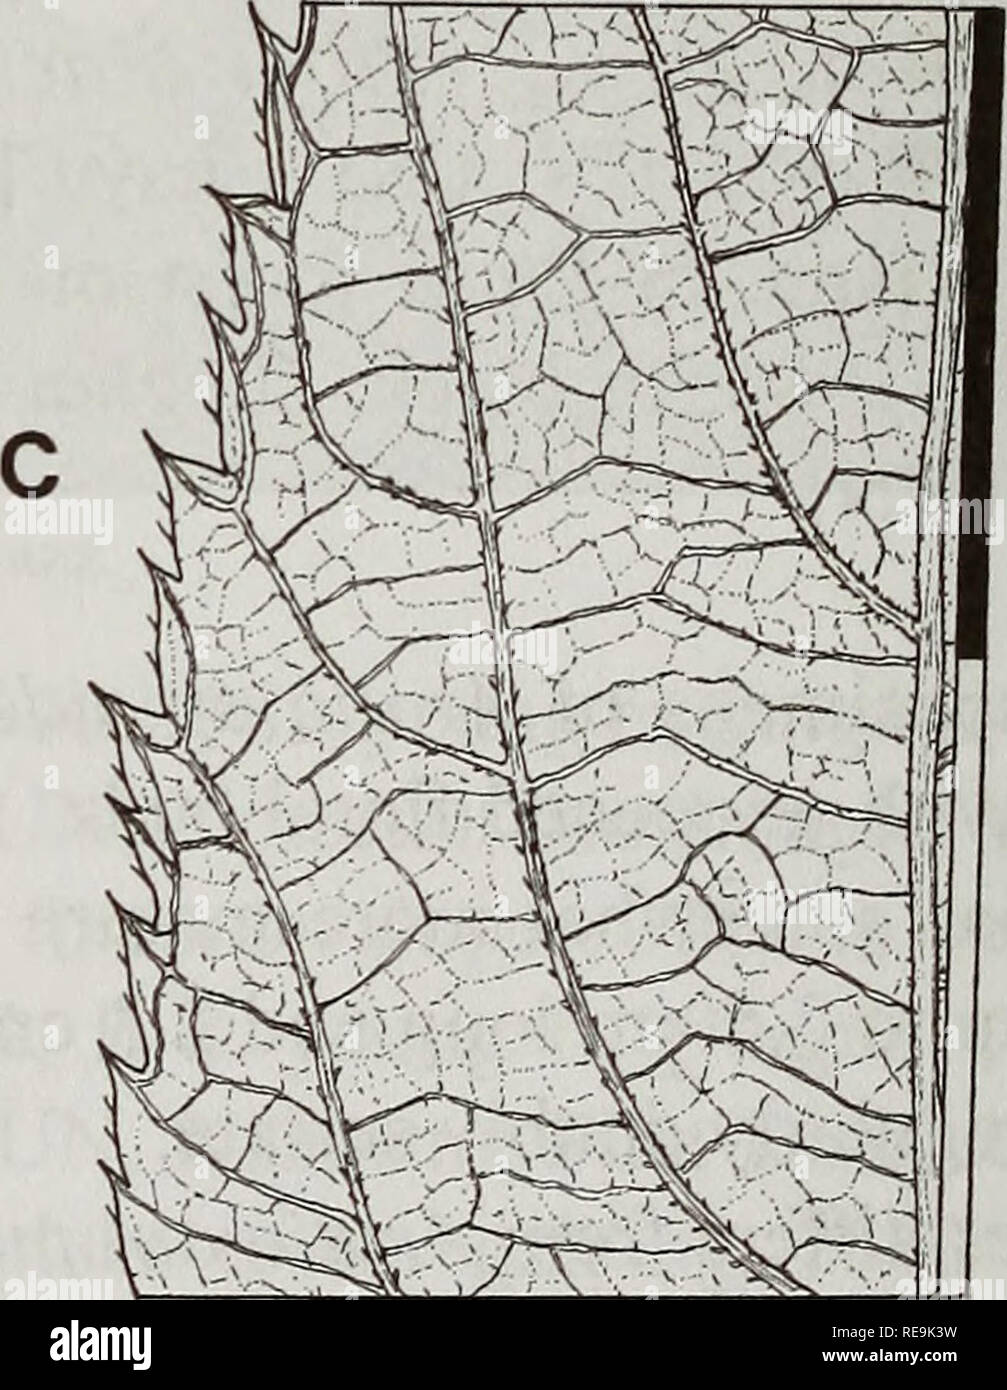 . Contributions from the United States National Herbarium. Botany. 2 mm. 2 cm Fig. 36. Aralia glabra Matrum. A. Habit showing a leaf and inflorescences. B. Base of petiole showing stipule morphology. C. Close-up of leaflet margin. D. Leaflet of a lower leaf. E. Floral bud. F. Flower. G. Flower after anthesis. H. Fruit (A-G- Murata 16727, US; U-Asano 5060, TI). habitats; 1430-1810 m. Additional specimens examined: Japan. Honshu. Pref. Nagano, Owiki to Denge, 1430- 1470 m, 25 Aug 1961, Chien-Chang Hsu 3190 (TI); m, in Tsuga diversifolia forest, flowers dark purple, 27 Jul 1964, in fl, Kana &amp; Stock Photo